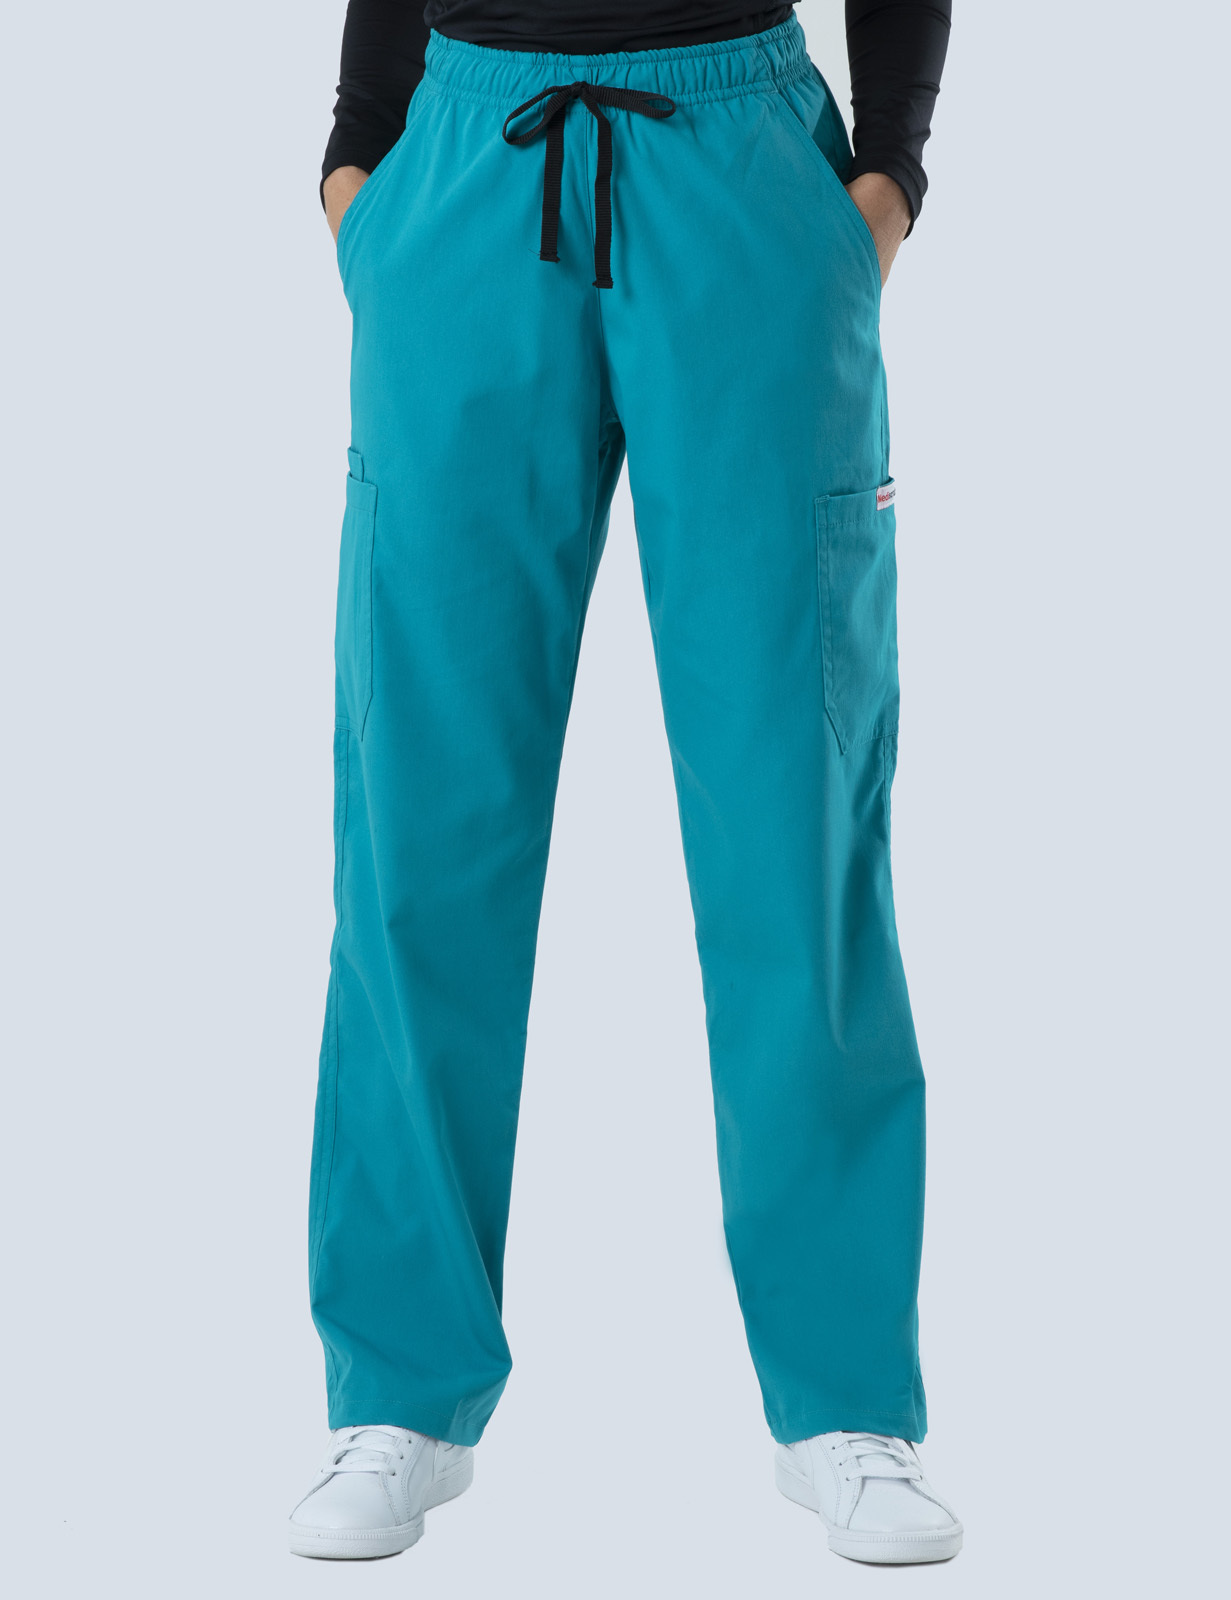 Robina Hospital - ED Nurse (Women's Fit Solid Scrub Top and Cargo Pants in Teal incl Logos)